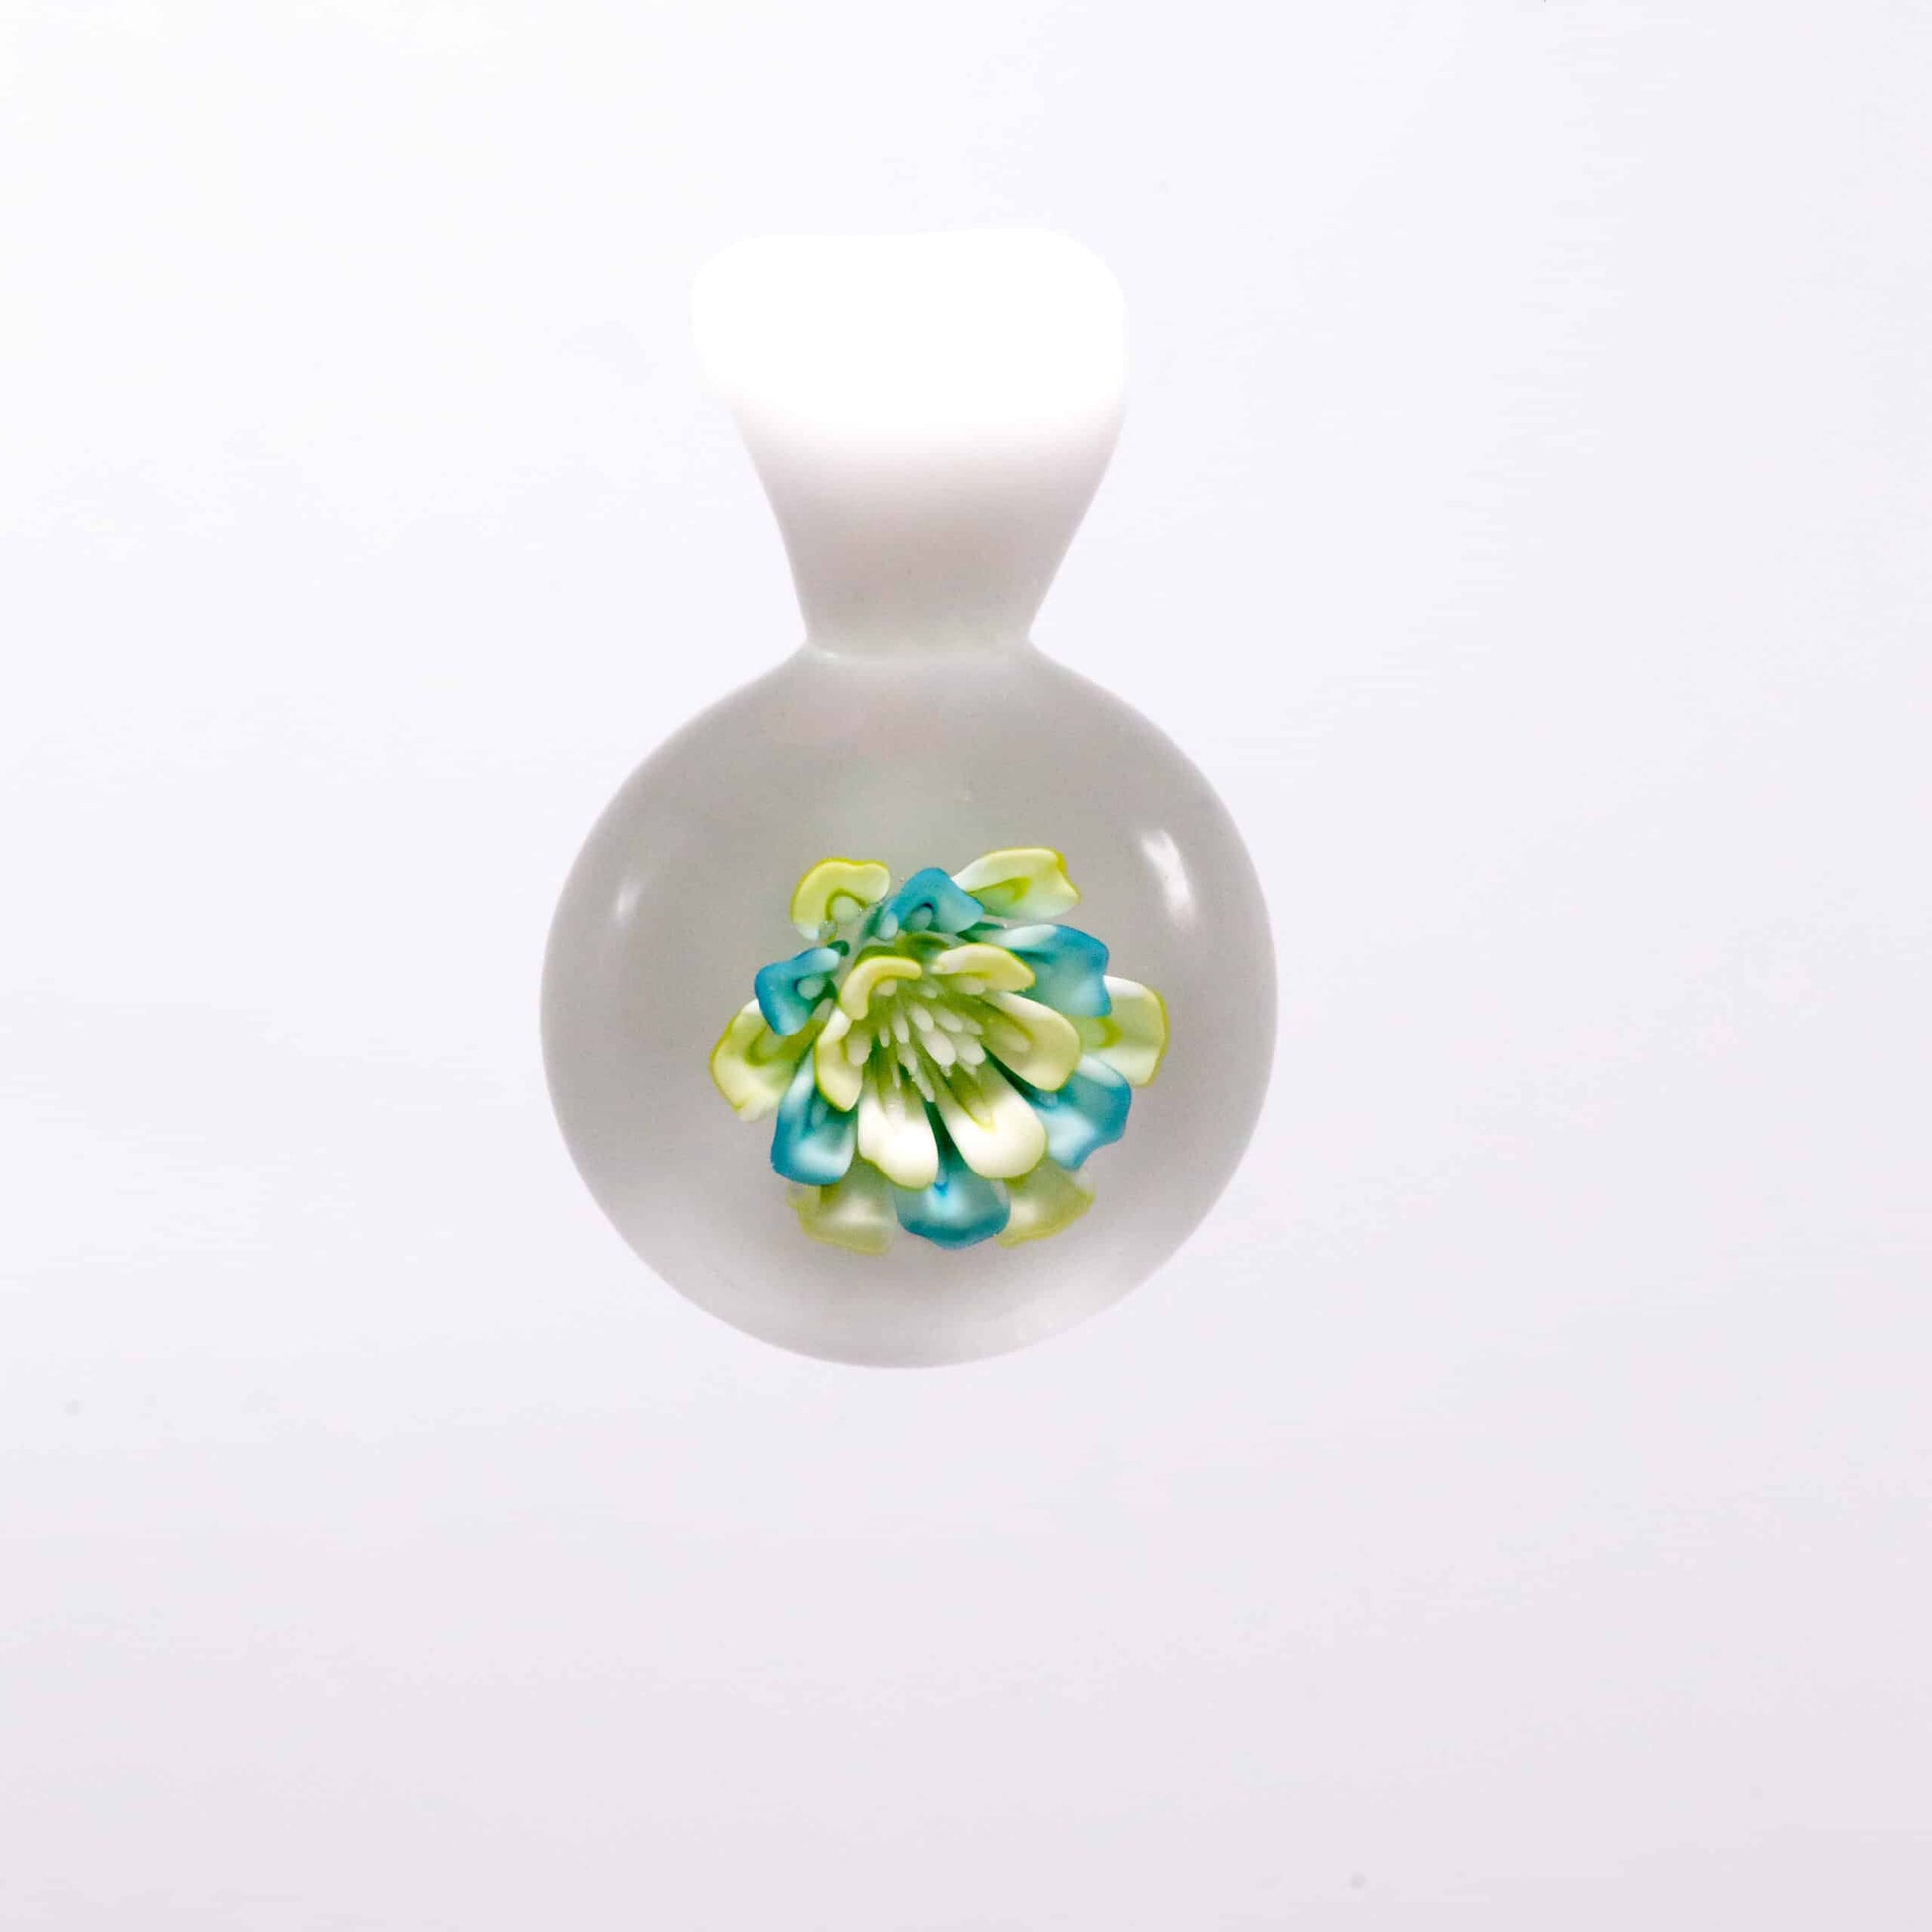 hand-blown glass pendant - Flower Pendant #1 BY KIMMO (BLUE AND WHITE)